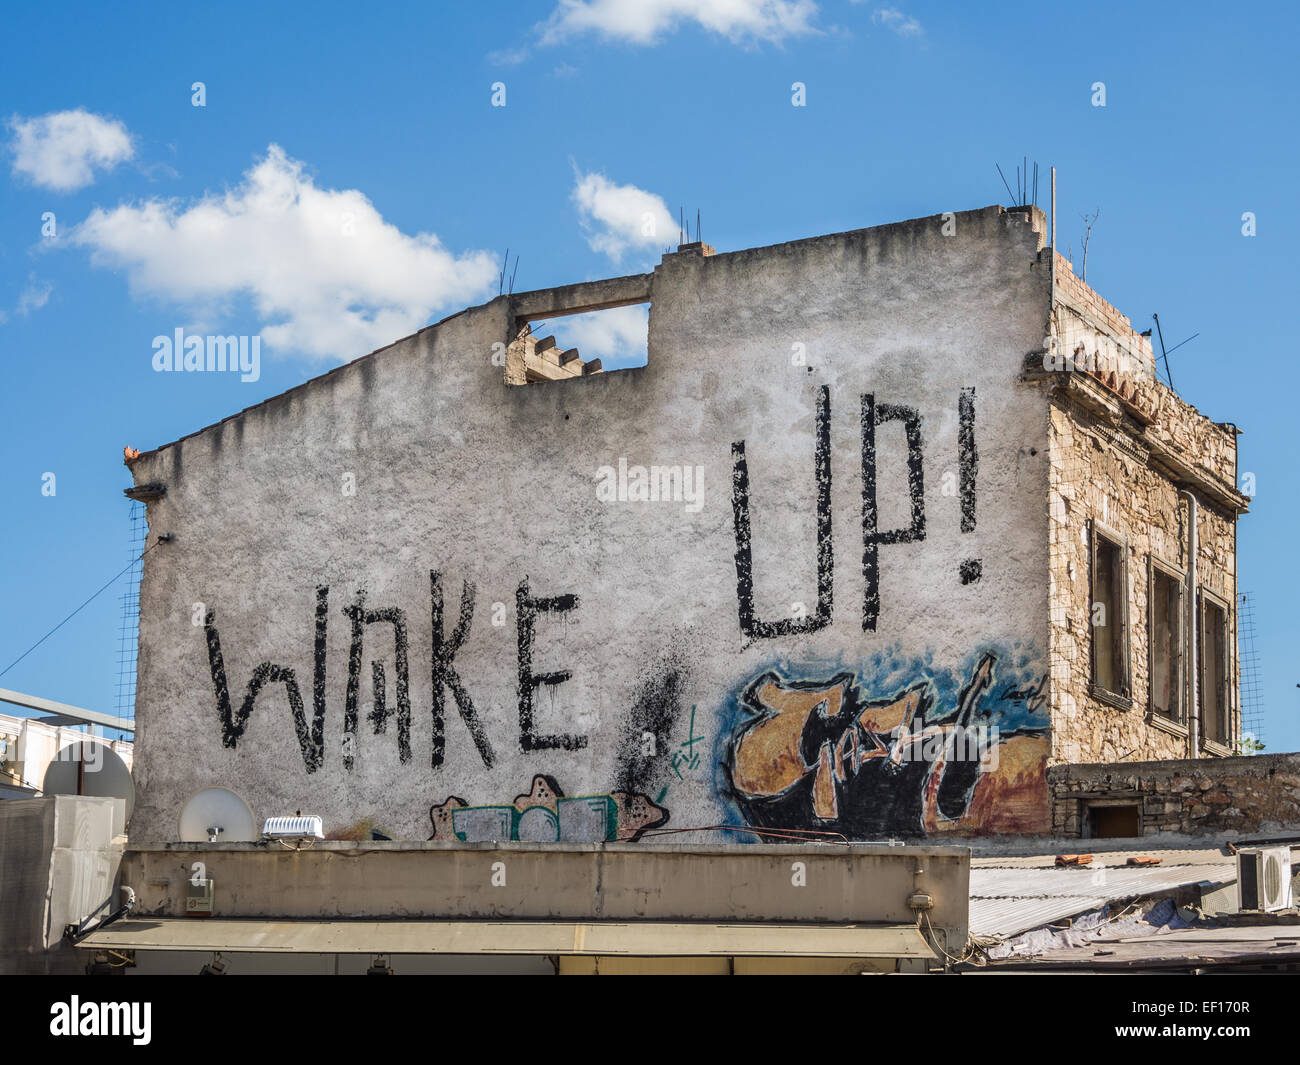 'Wake up' Street art or graffiti murial painted onto the side of a building in Plaka Athens Stock Photo